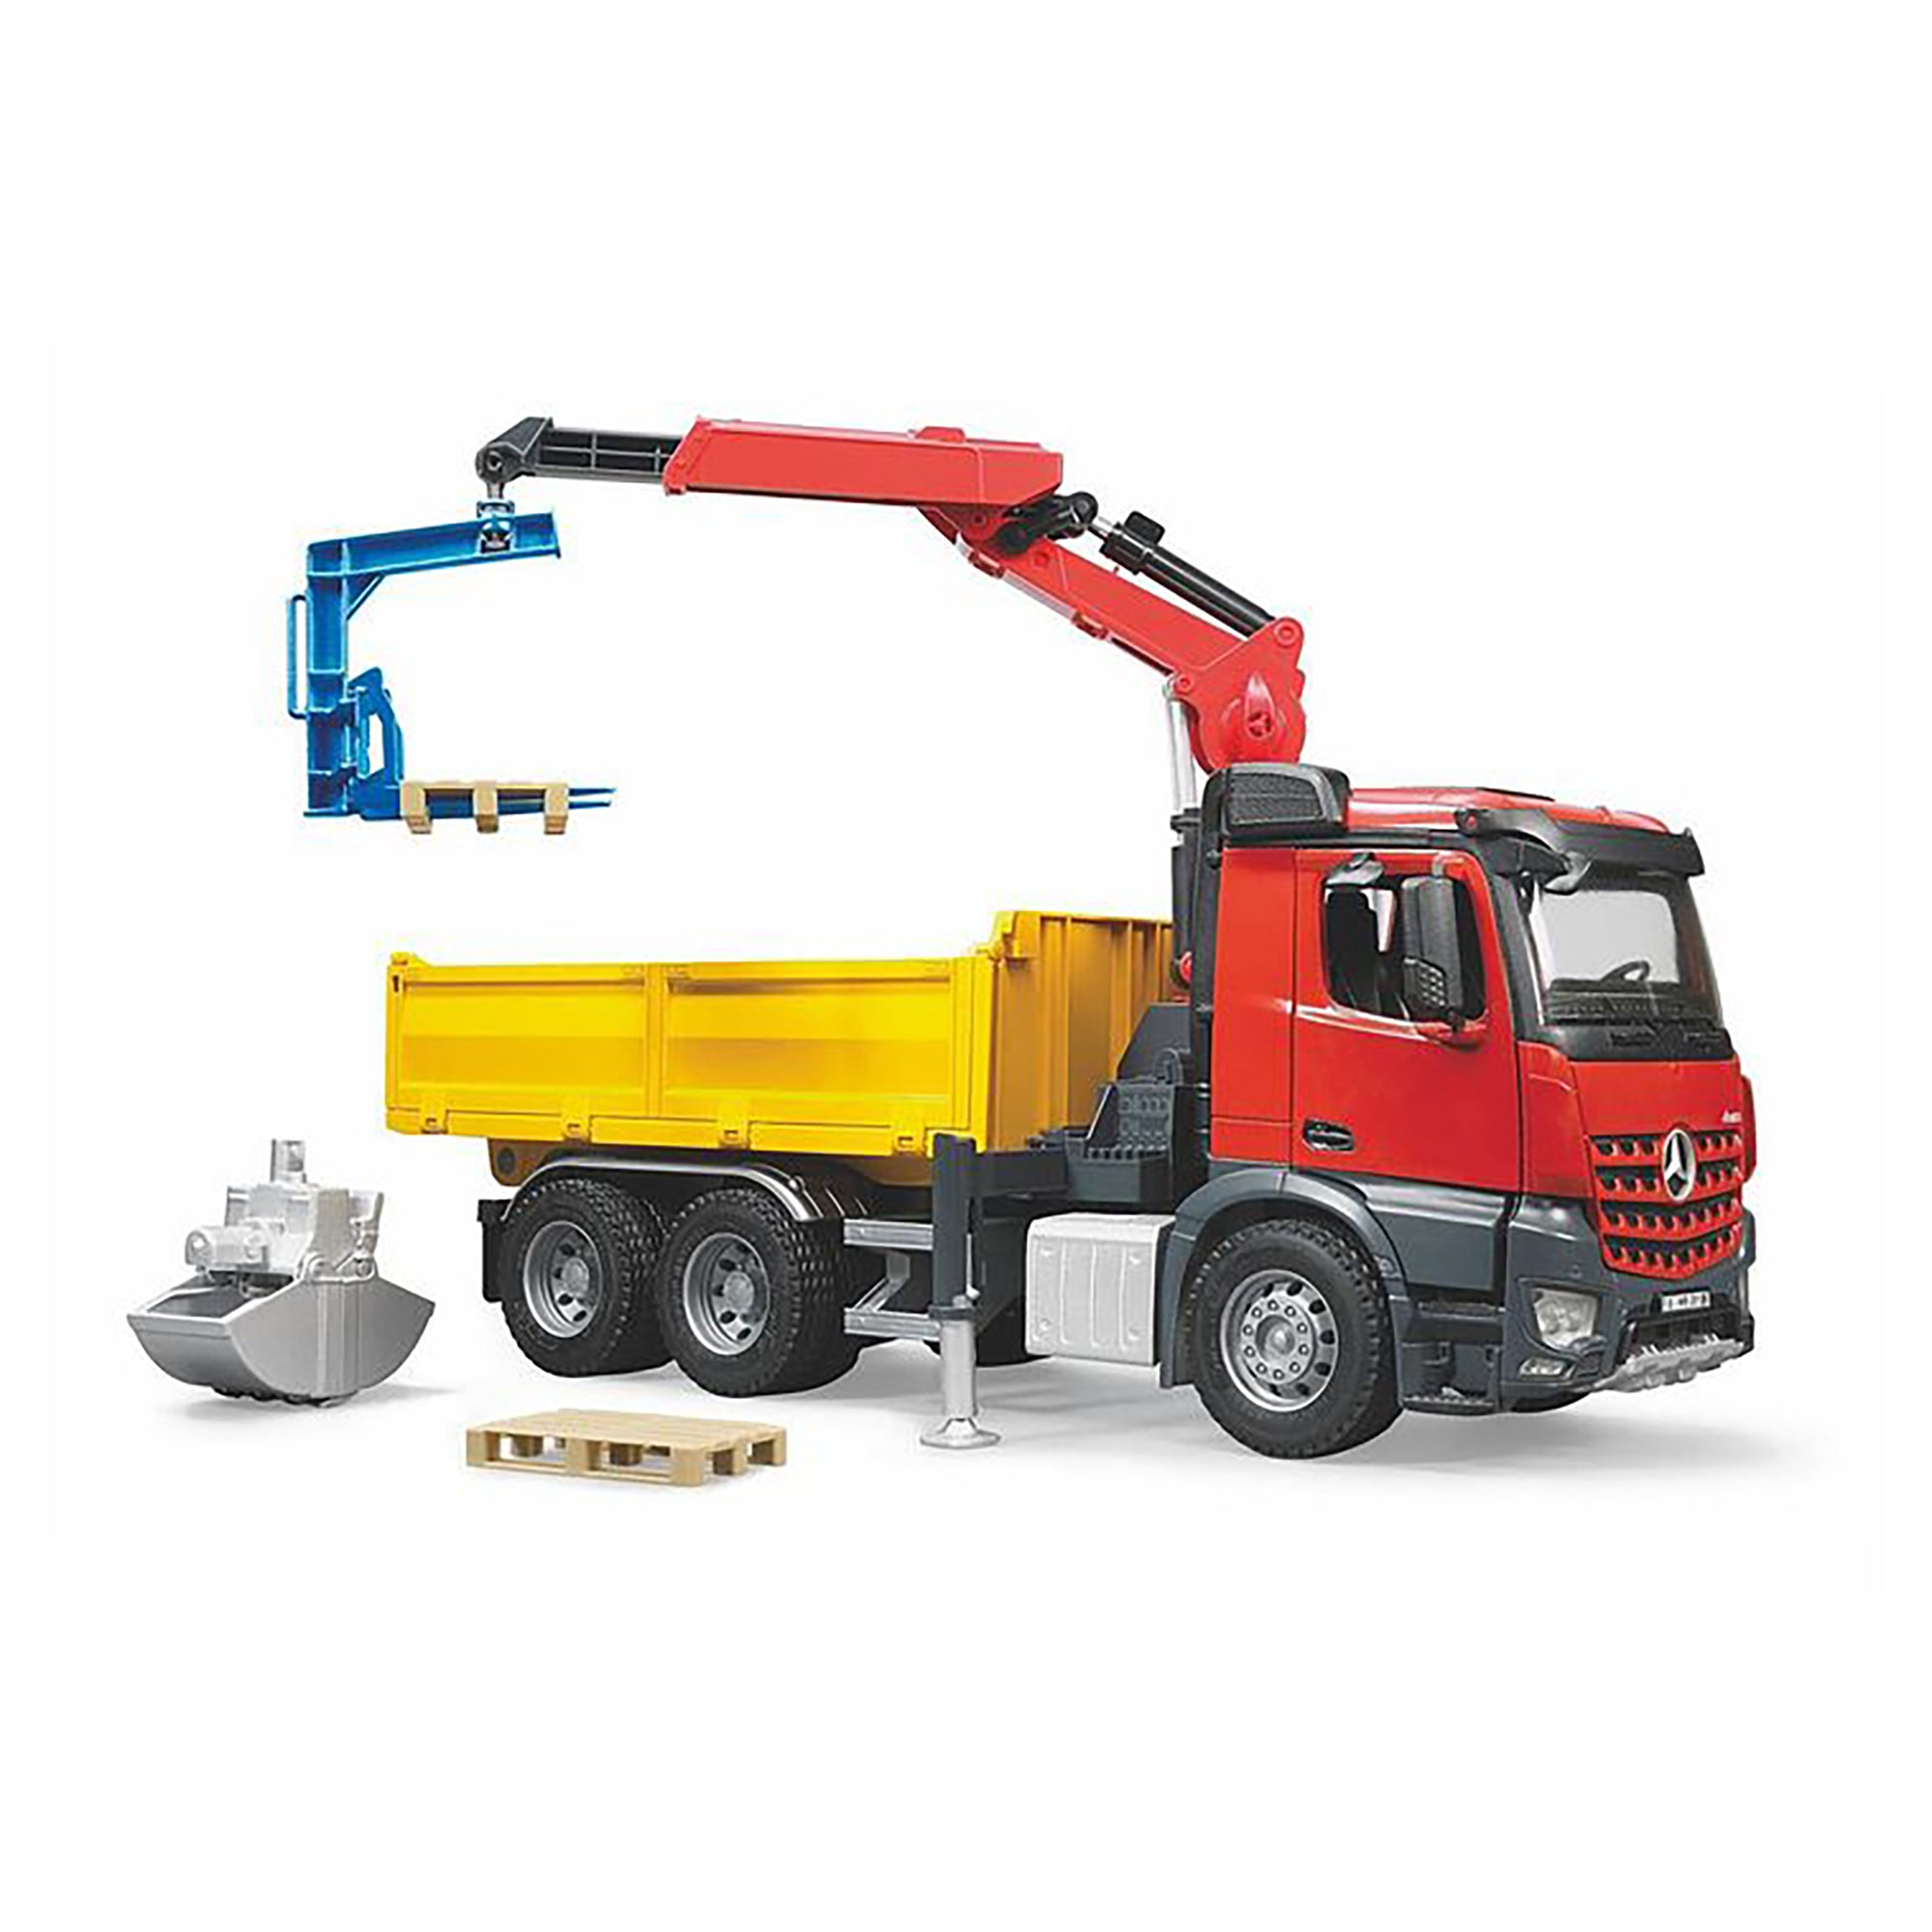 Bruder 1/16 MB Arcos Construction Truck with Crane and Accessories